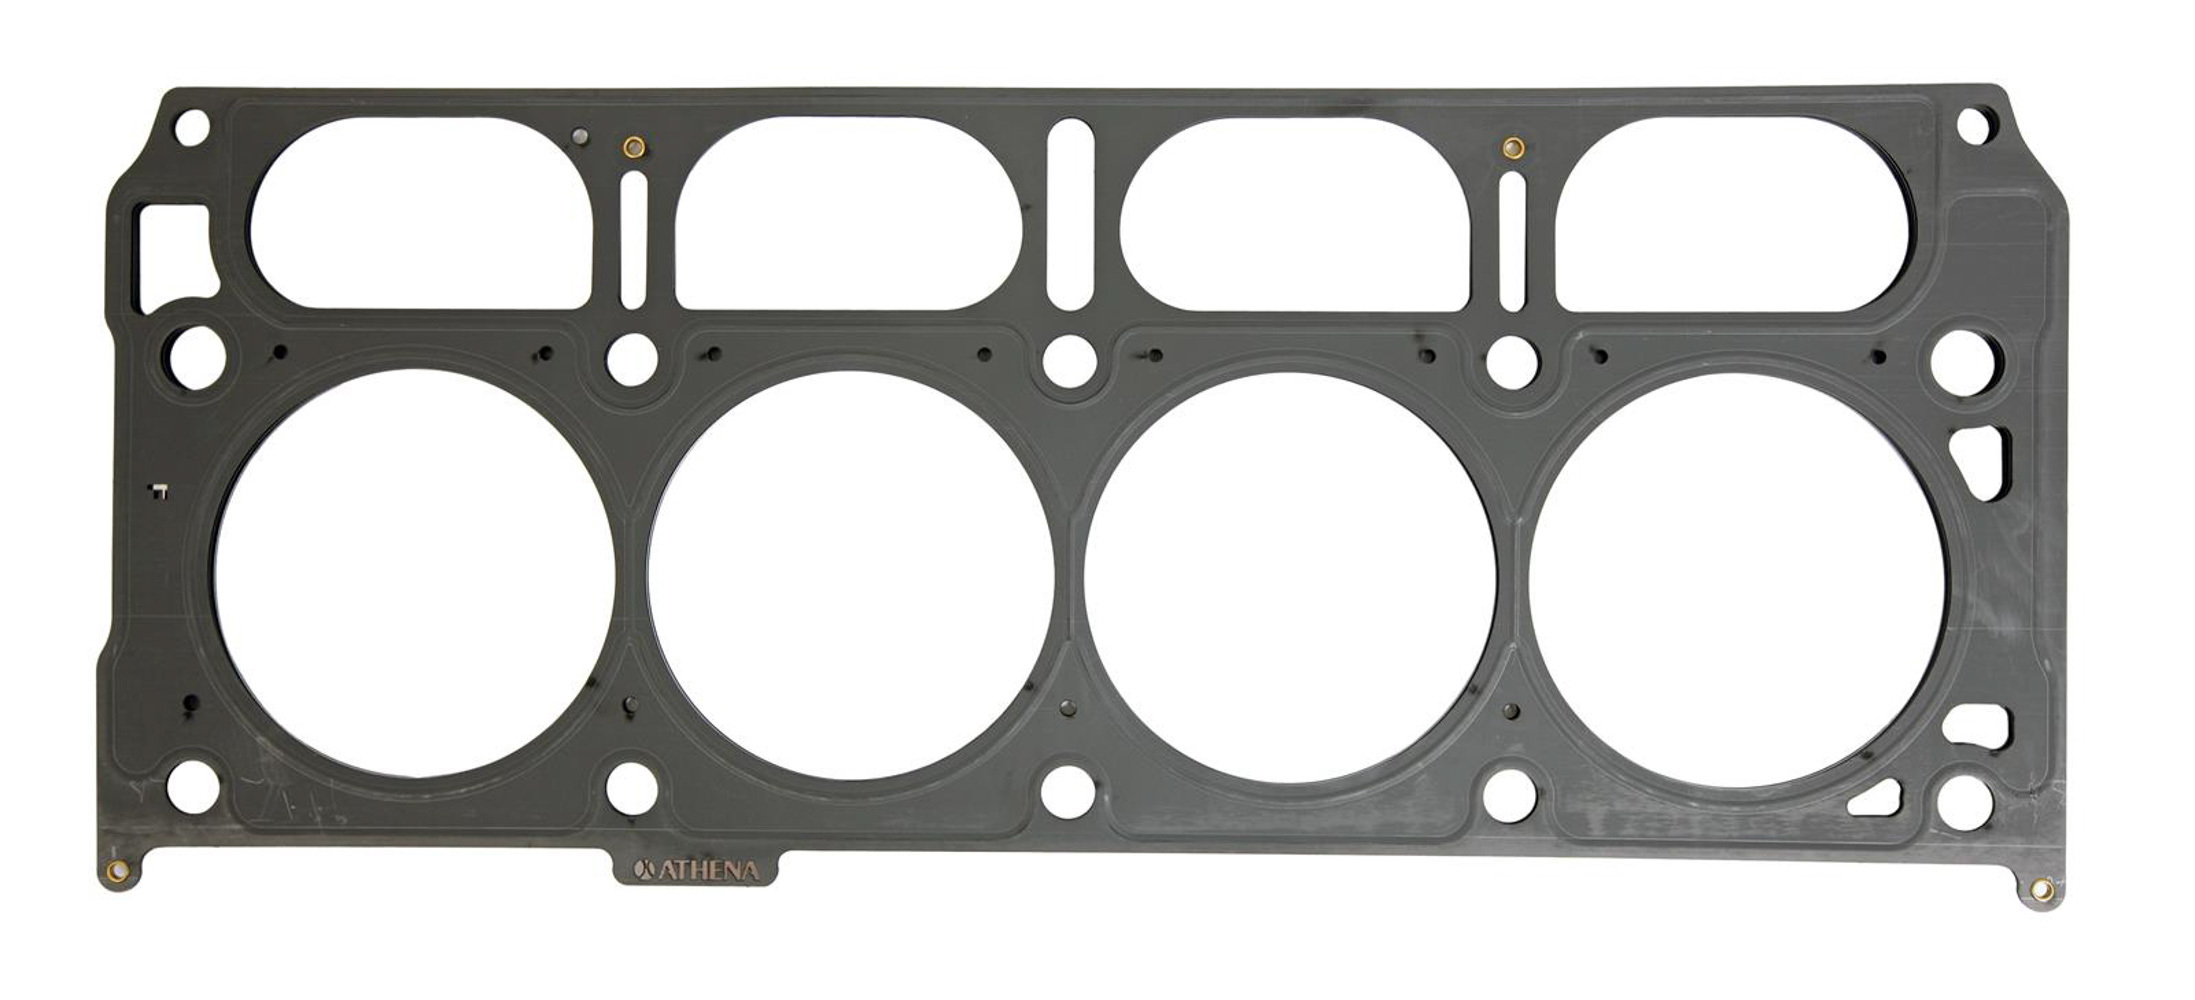 SCE Gaskets M271051GS - Cylinder Head Gasket, MLS Spartan, 4.100 in Bore, 0.051 in Compression Thickness, Multi-Layer Steel, GM LT-Series, Each